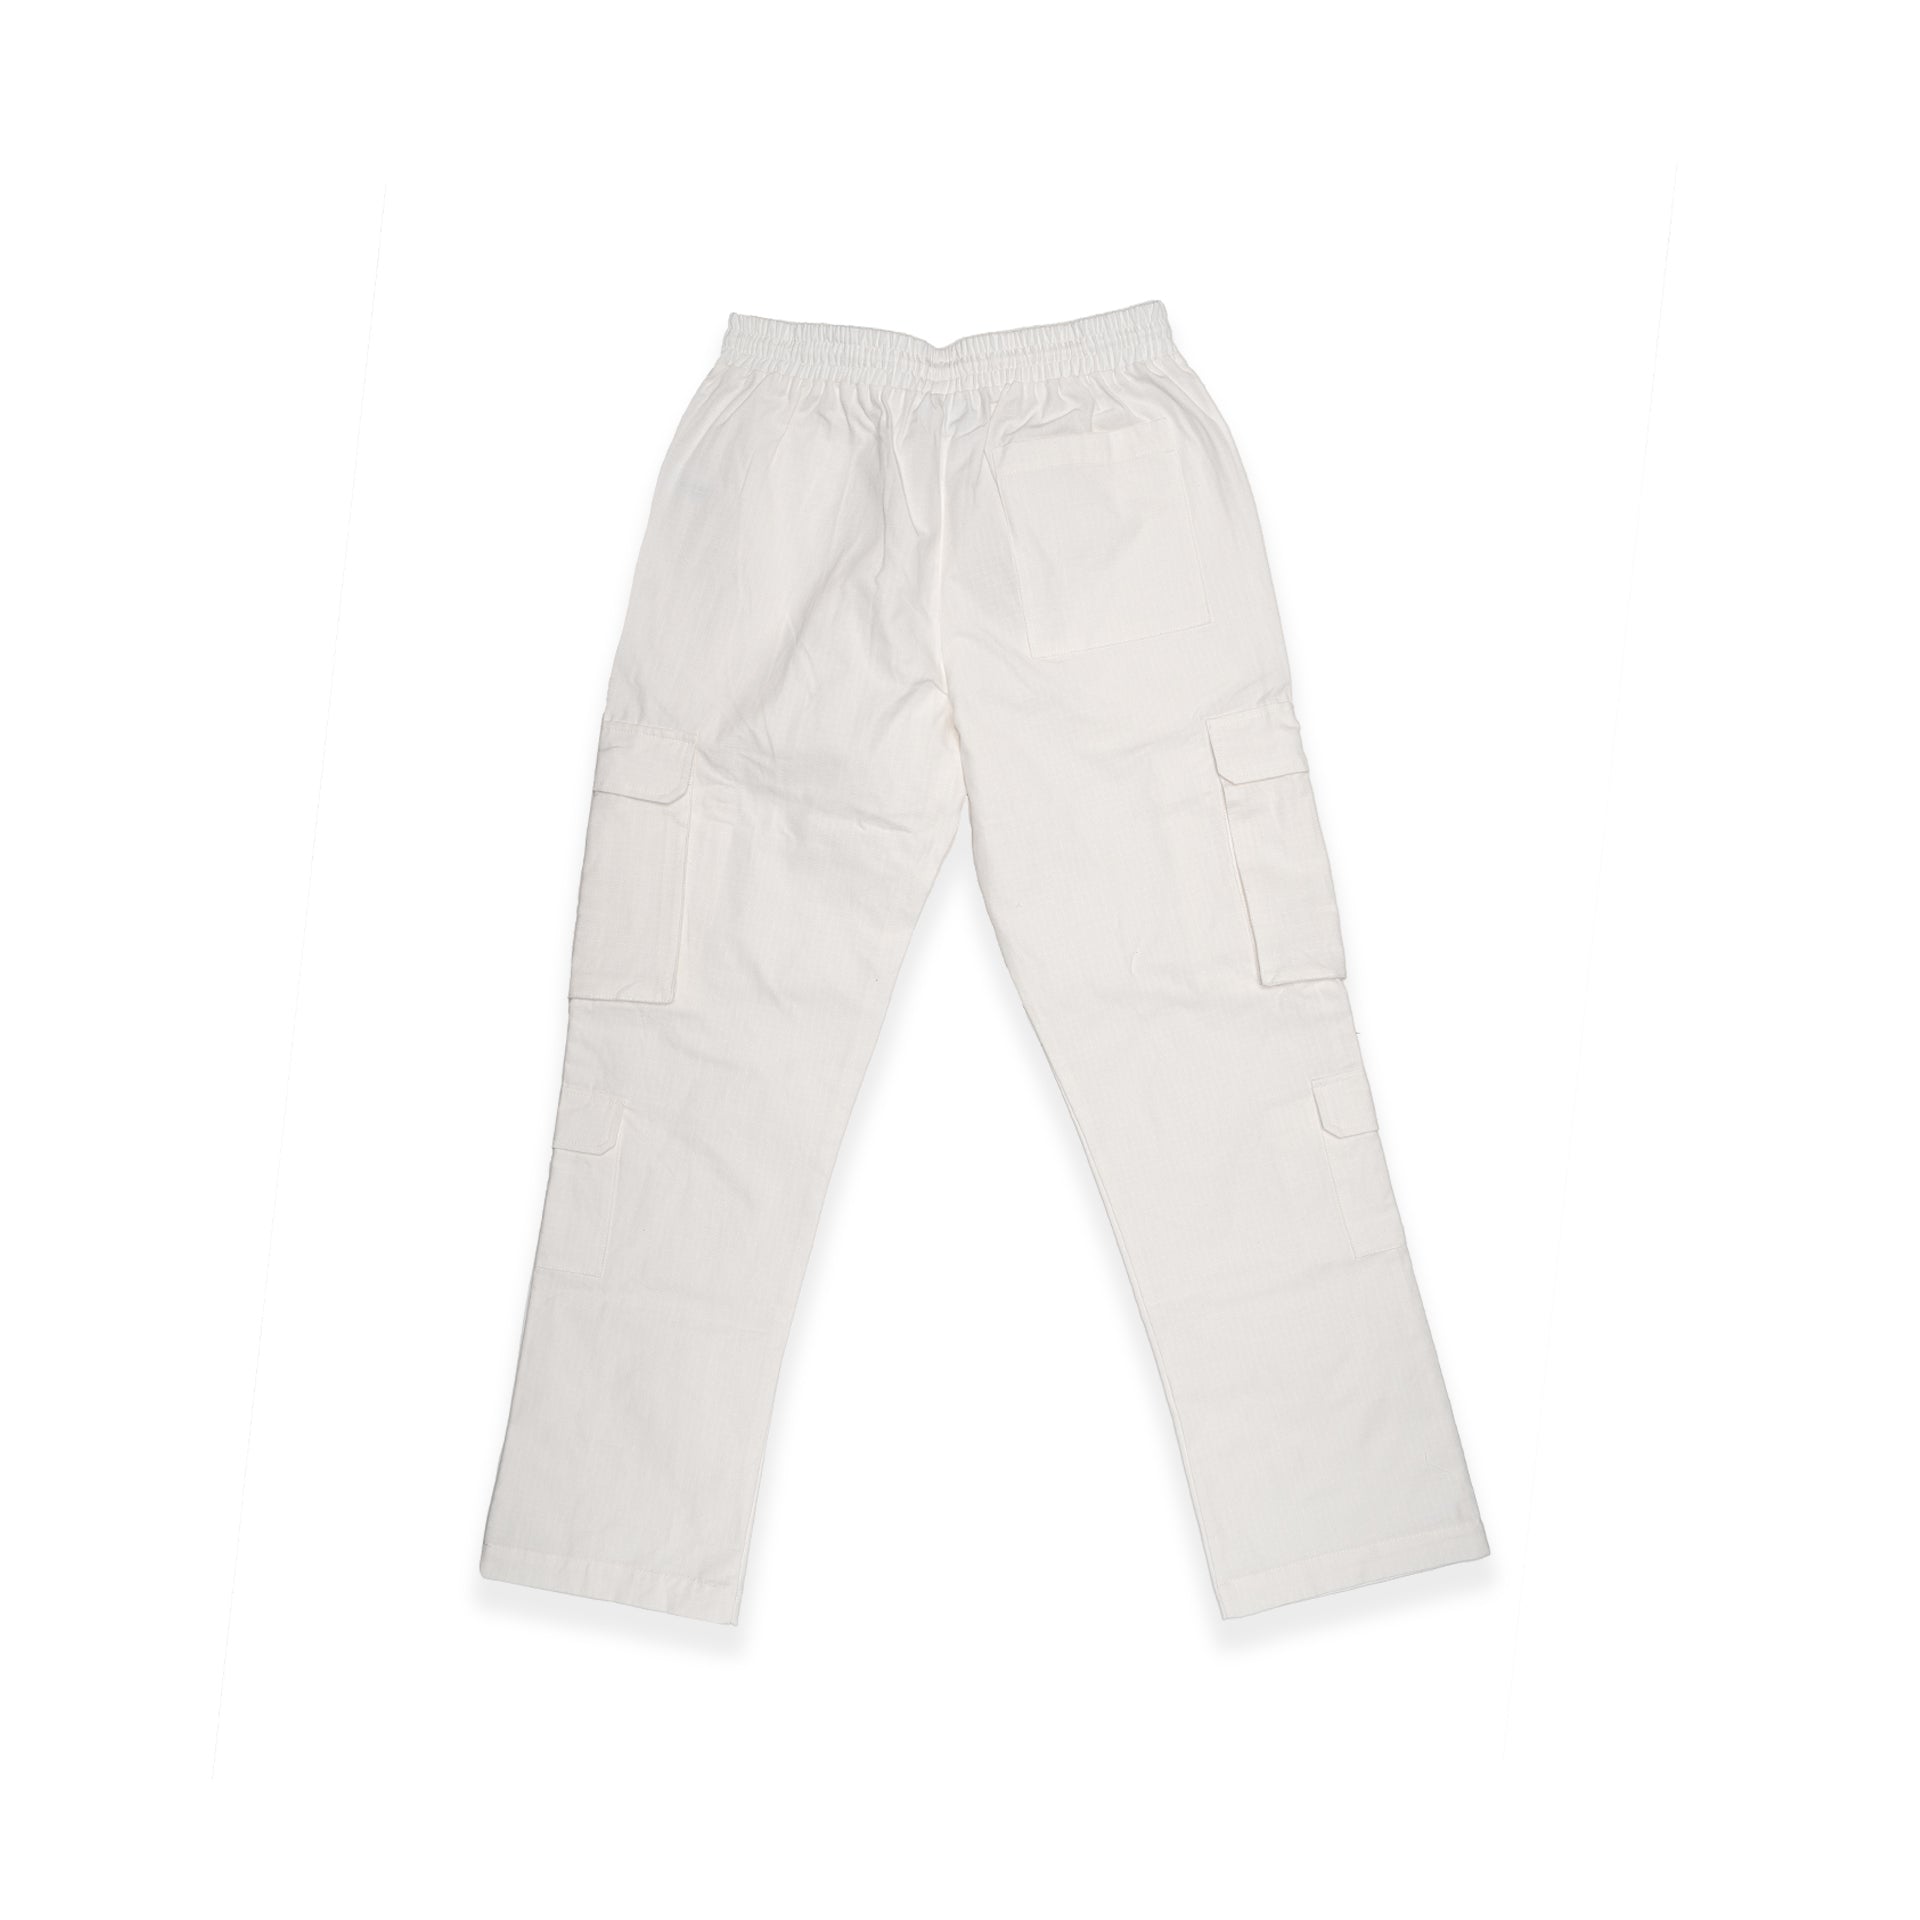 White Cargo Pants by Brandtionary